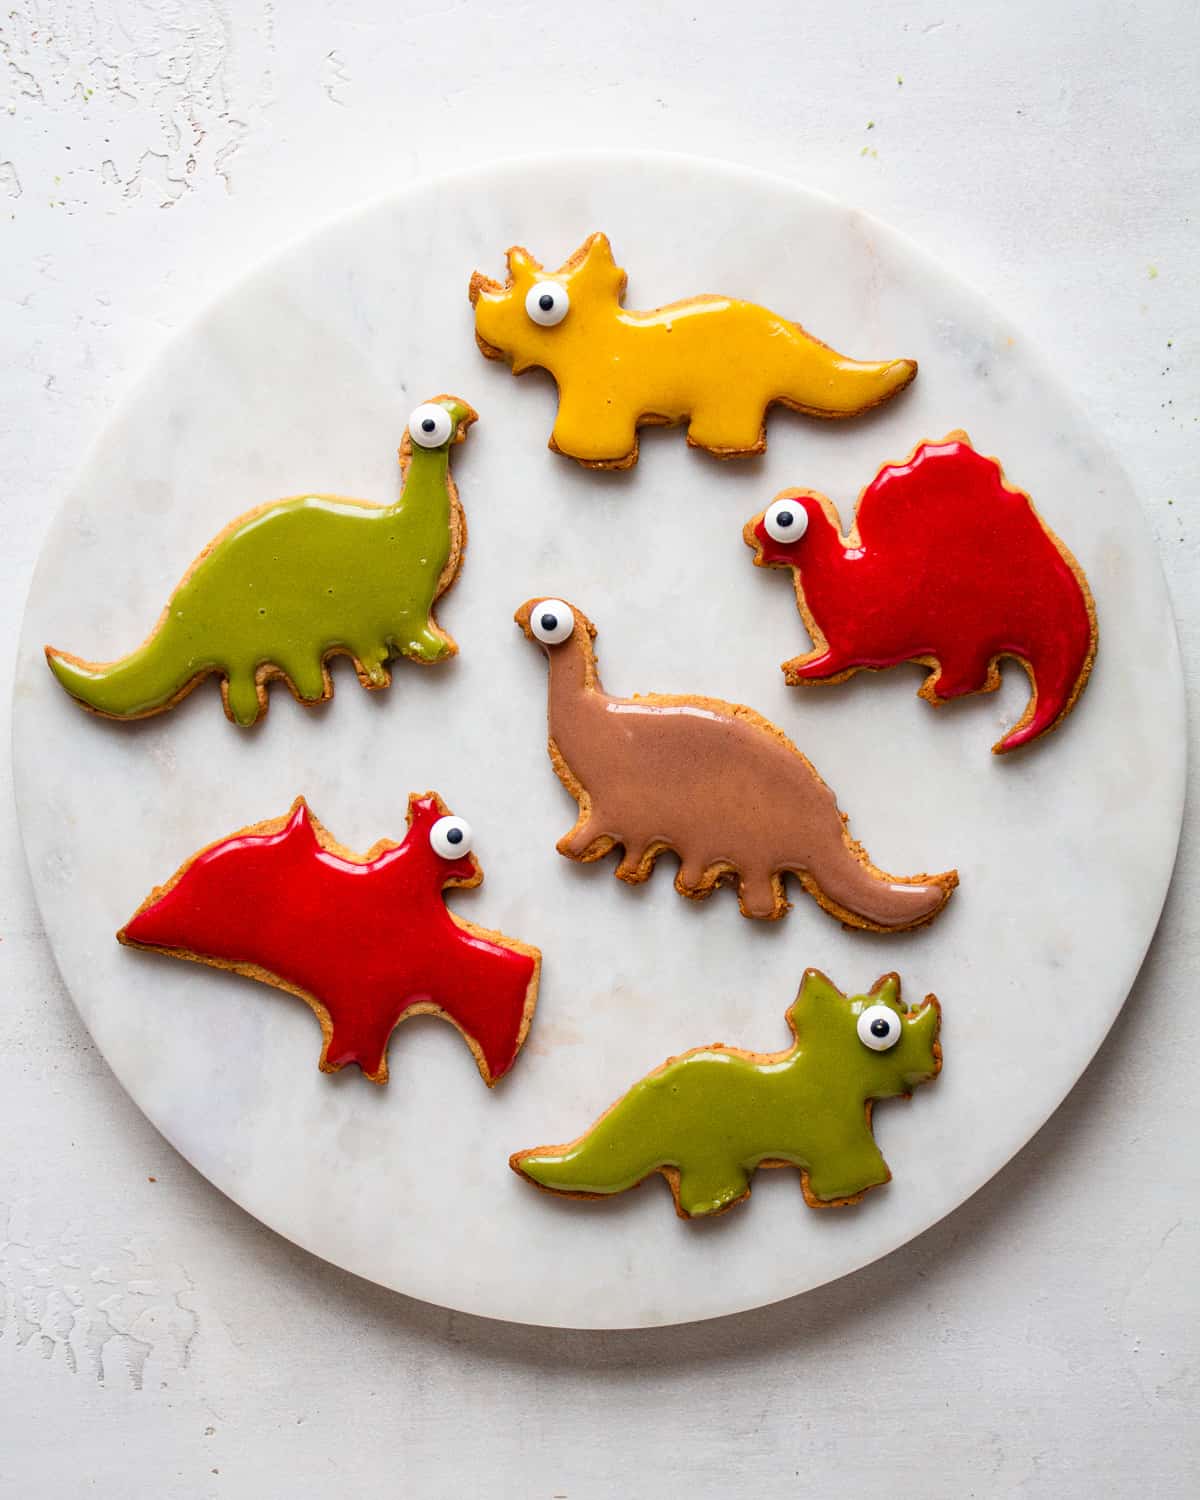 Dinosaur-shaped cookies with pink, green, yellow, and brown icing made from real foods.